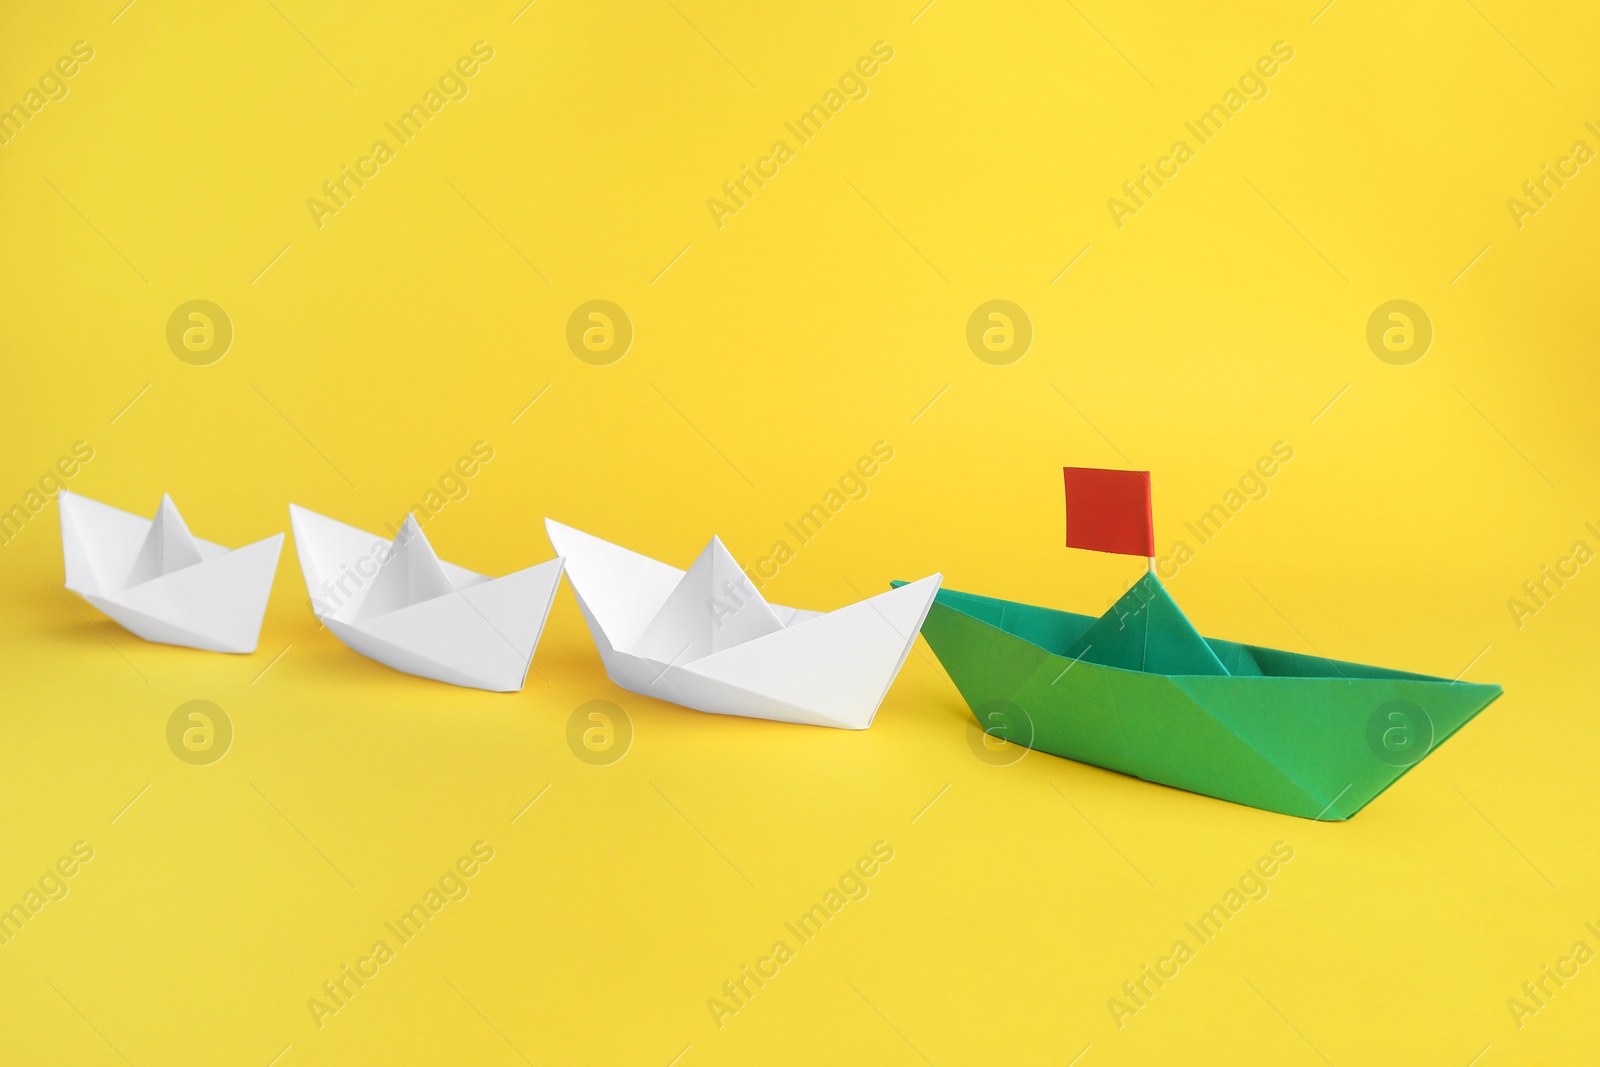 Photo of Group of paper boats following green one on yellow background,. Leadership concept